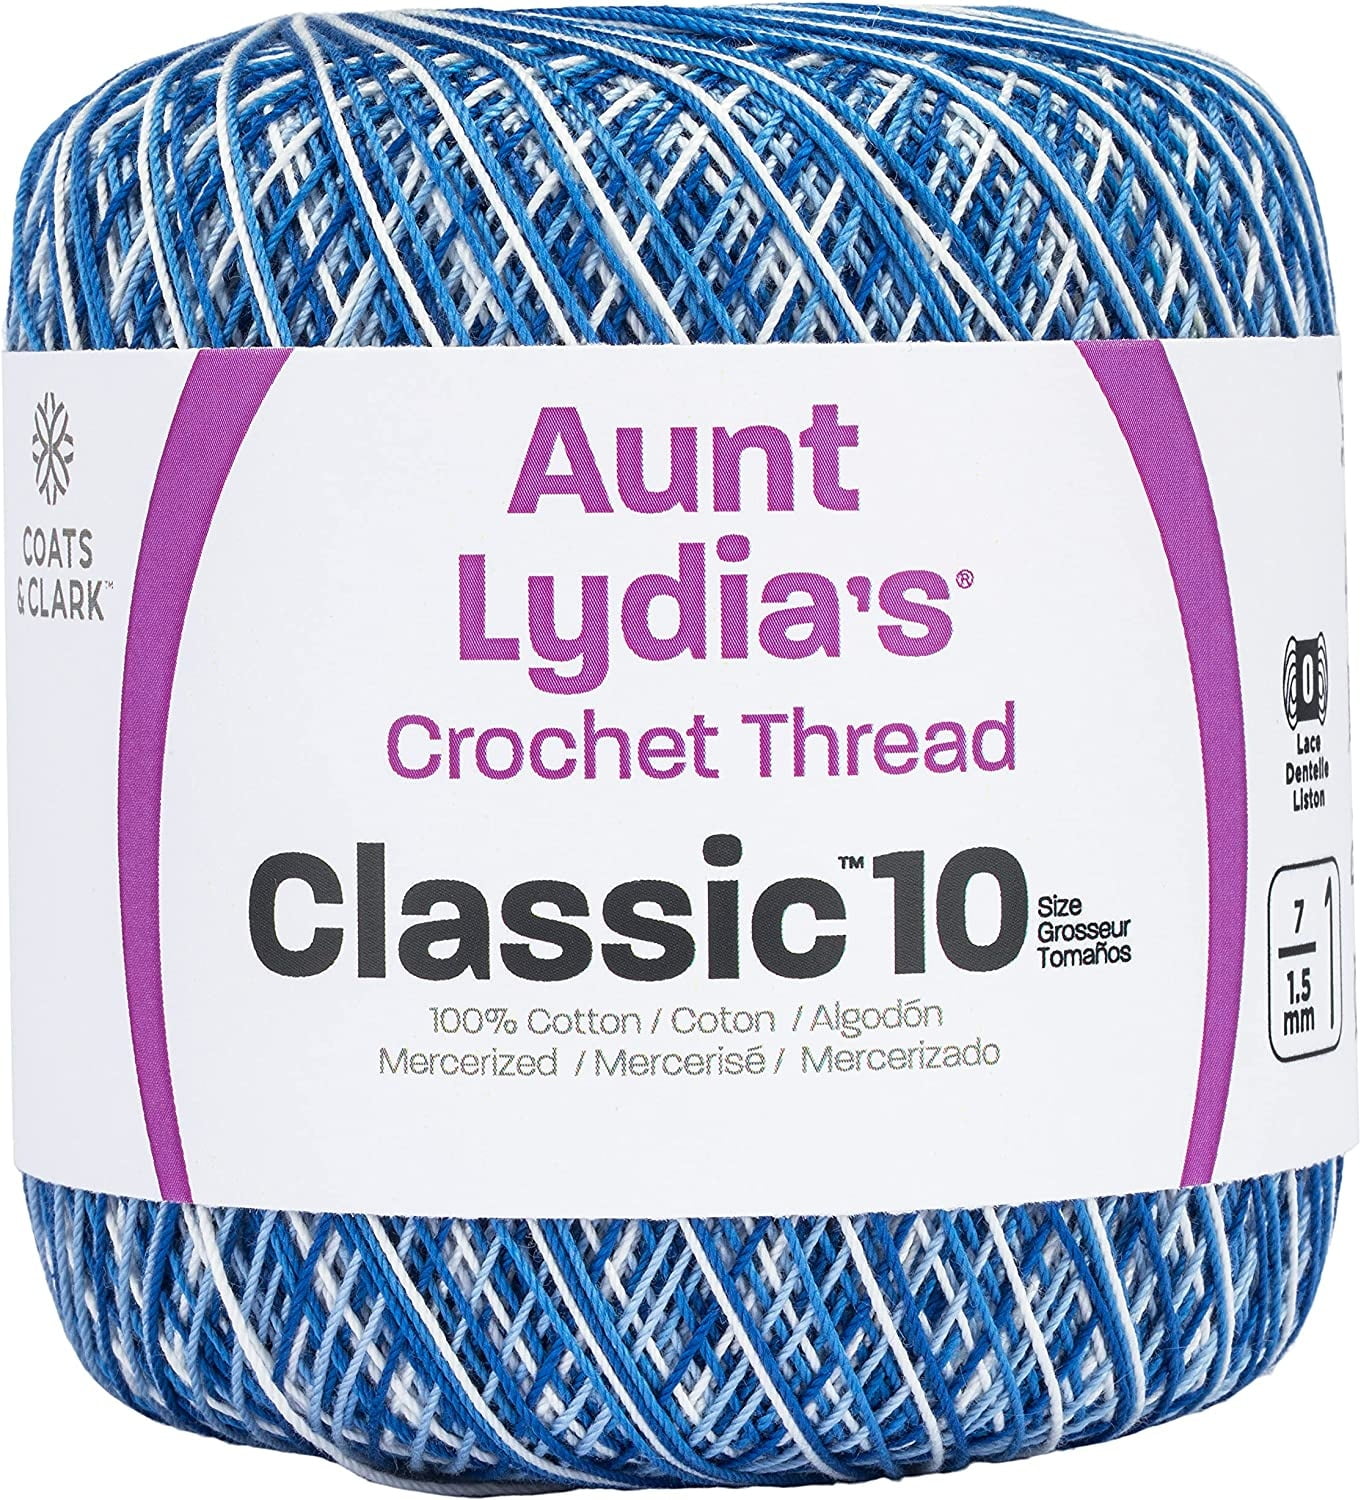 TAUPE CLAIR - Aunt Lydia's Classic 10 Crochet Thread. 350yds. Color #8550